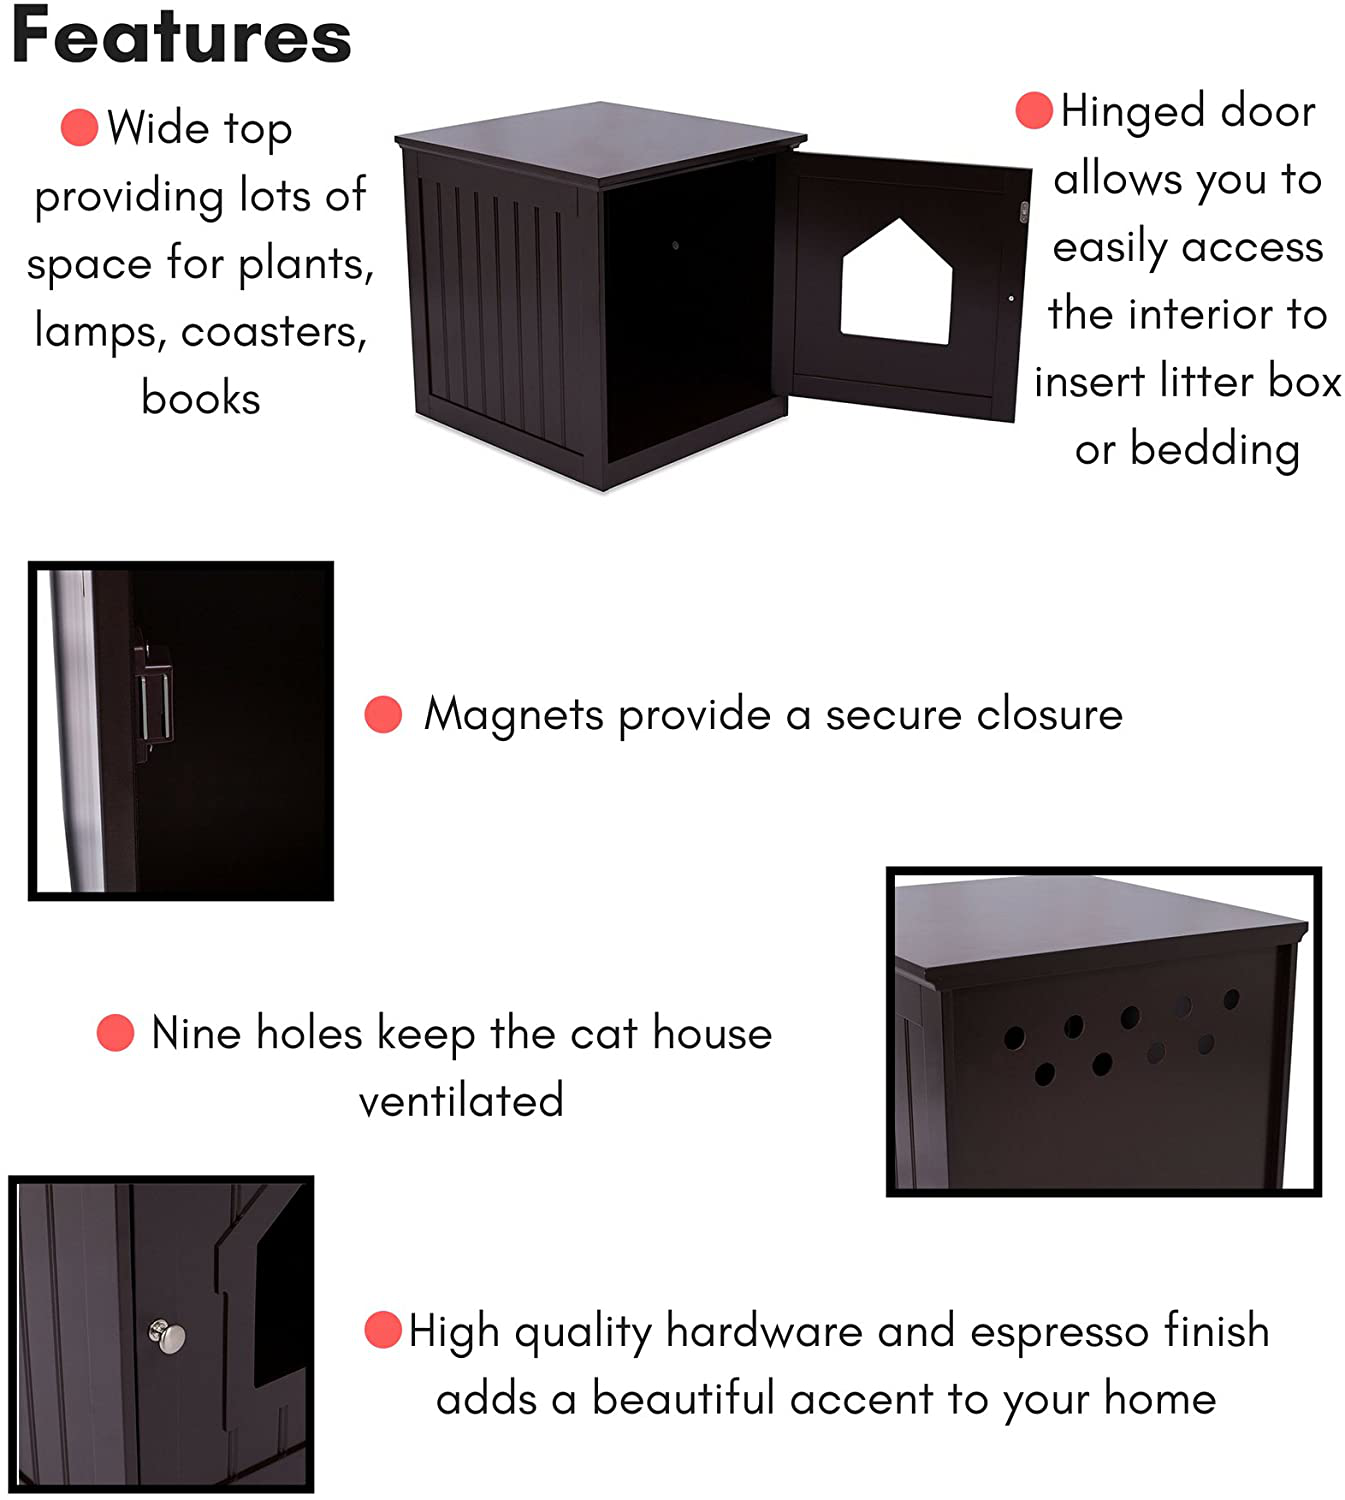 Birdrock Home Decorative Cat House & Side Table - Cat Home Covered Nightstand - Indoor Pet Crate - Litter Box Enclosure - Hooded Hidden Pet Box - Cats Furniture Cabinet - Kitty Washroom Animals & Pet Supplies > Pet Supplies > Cat Supplies > Cat Furniture BIRDROCK HOME   